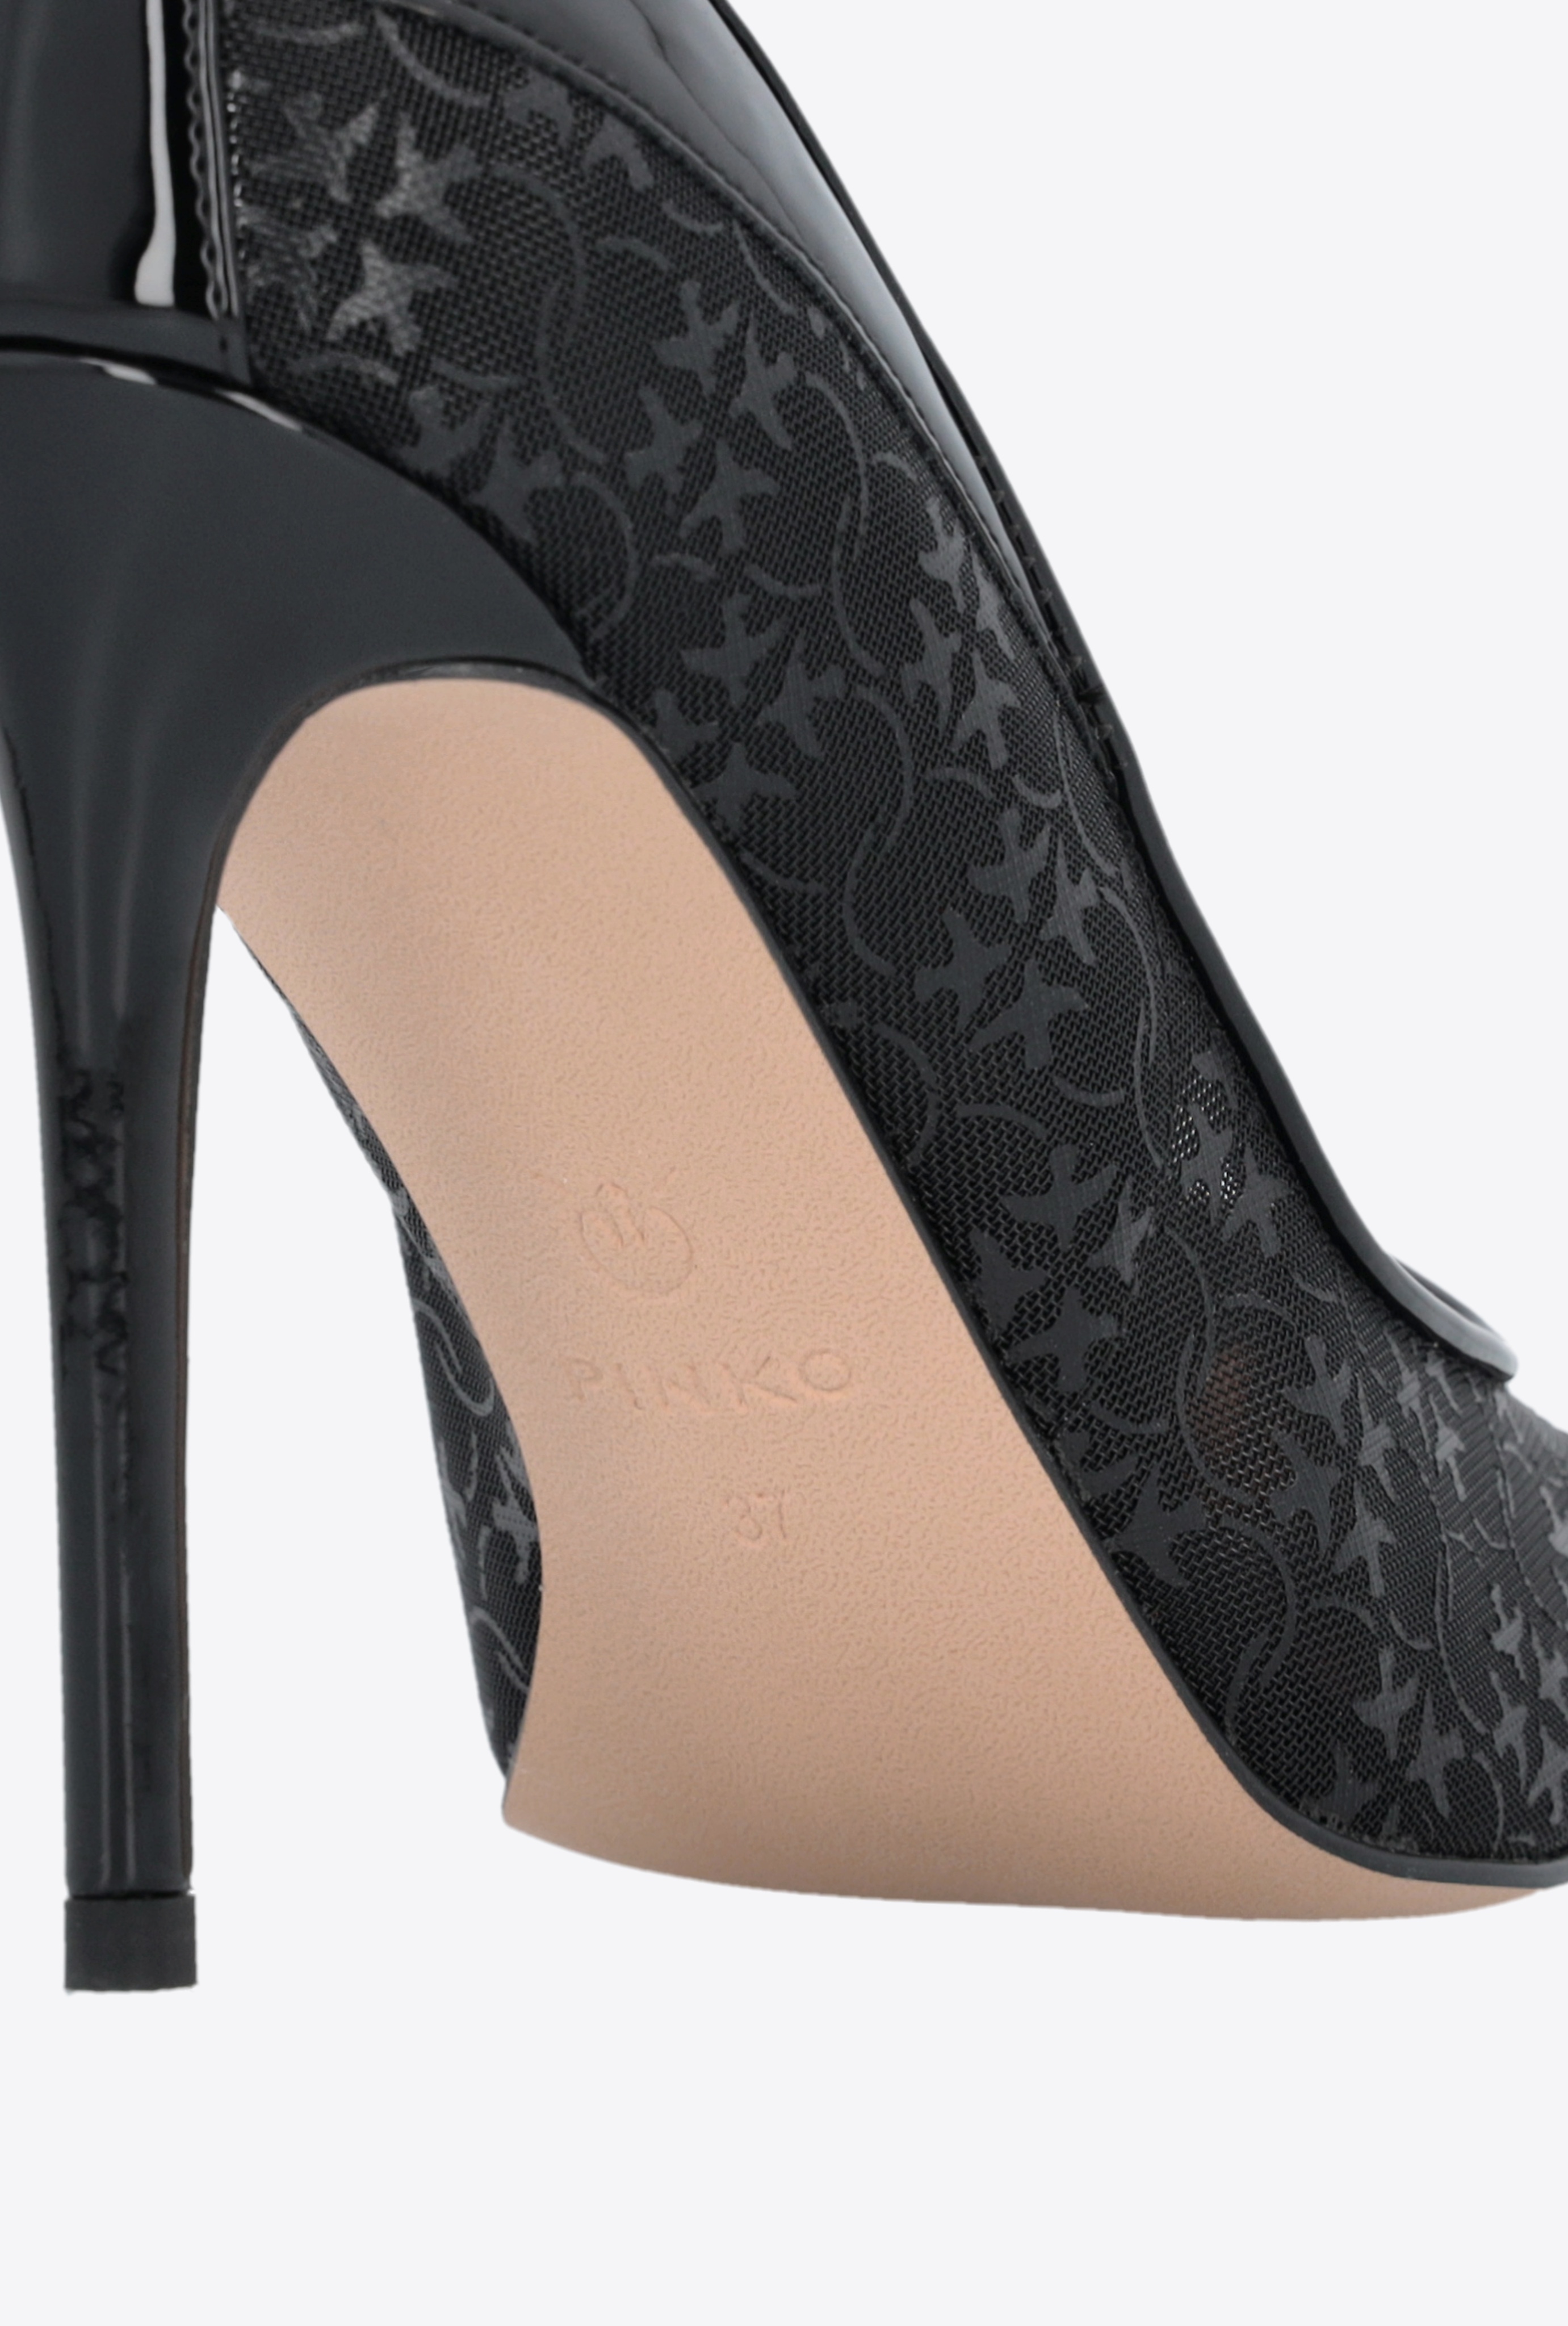 LOVE BIRDS PATENT AND MESH PUMPS - 9